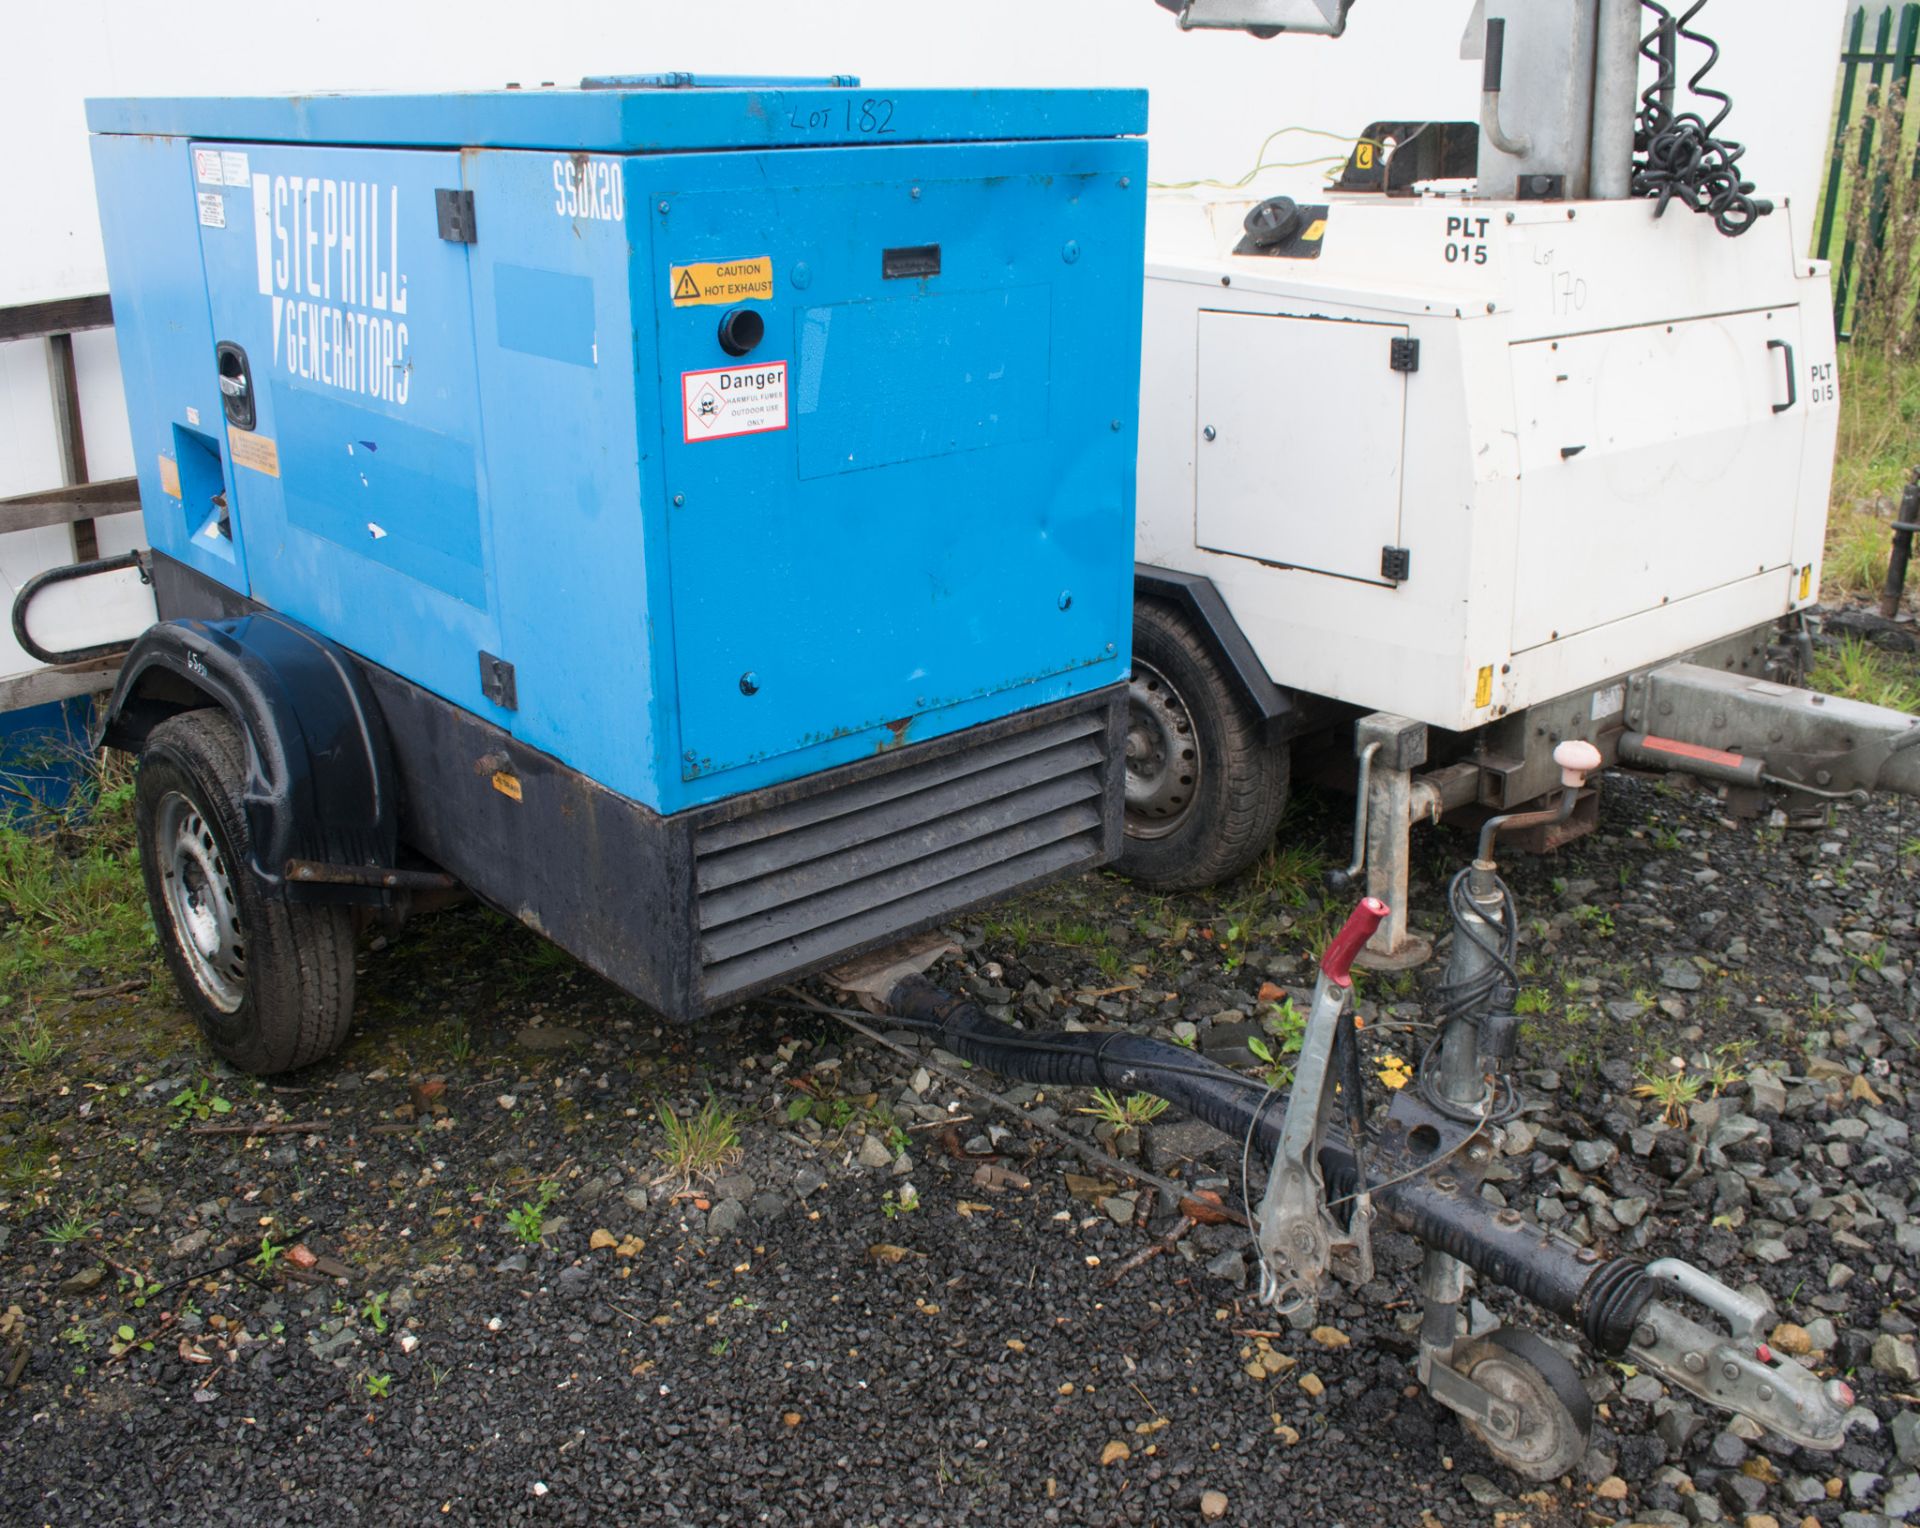 STEPHILL SSDX 20 20 Kva diesel driven fast tow generator Recorded hours: 13,414